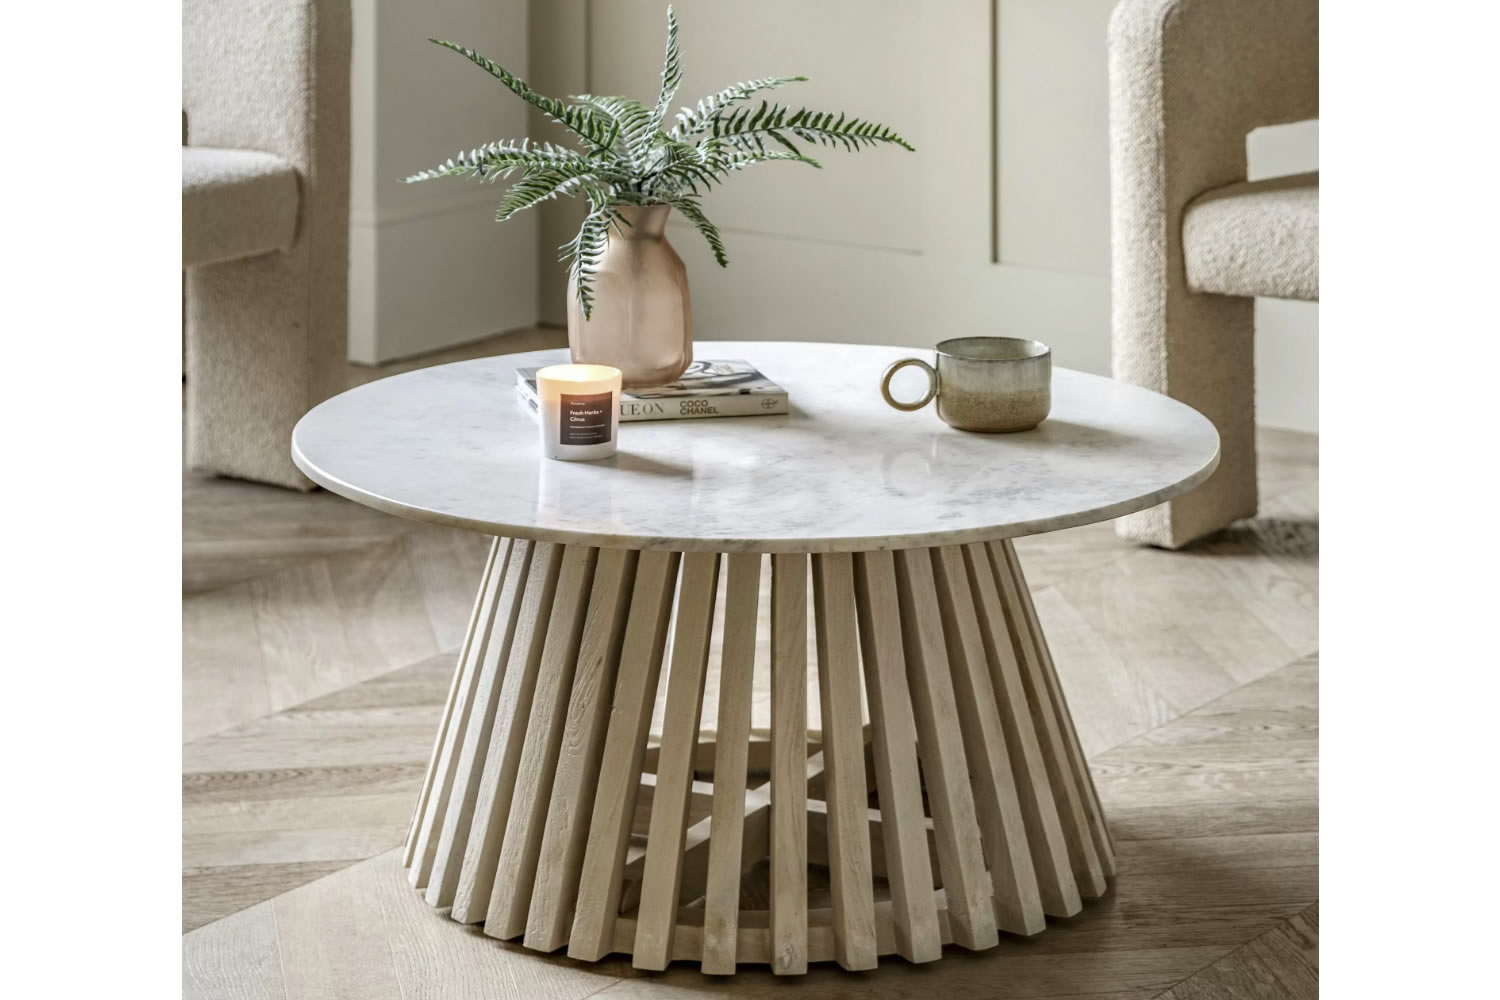 View Soho Round Coffee Table Robust Mango Wood Slatted Base Modern Design Practical White Marble Top Easy Assembly Matching Pieces Available information